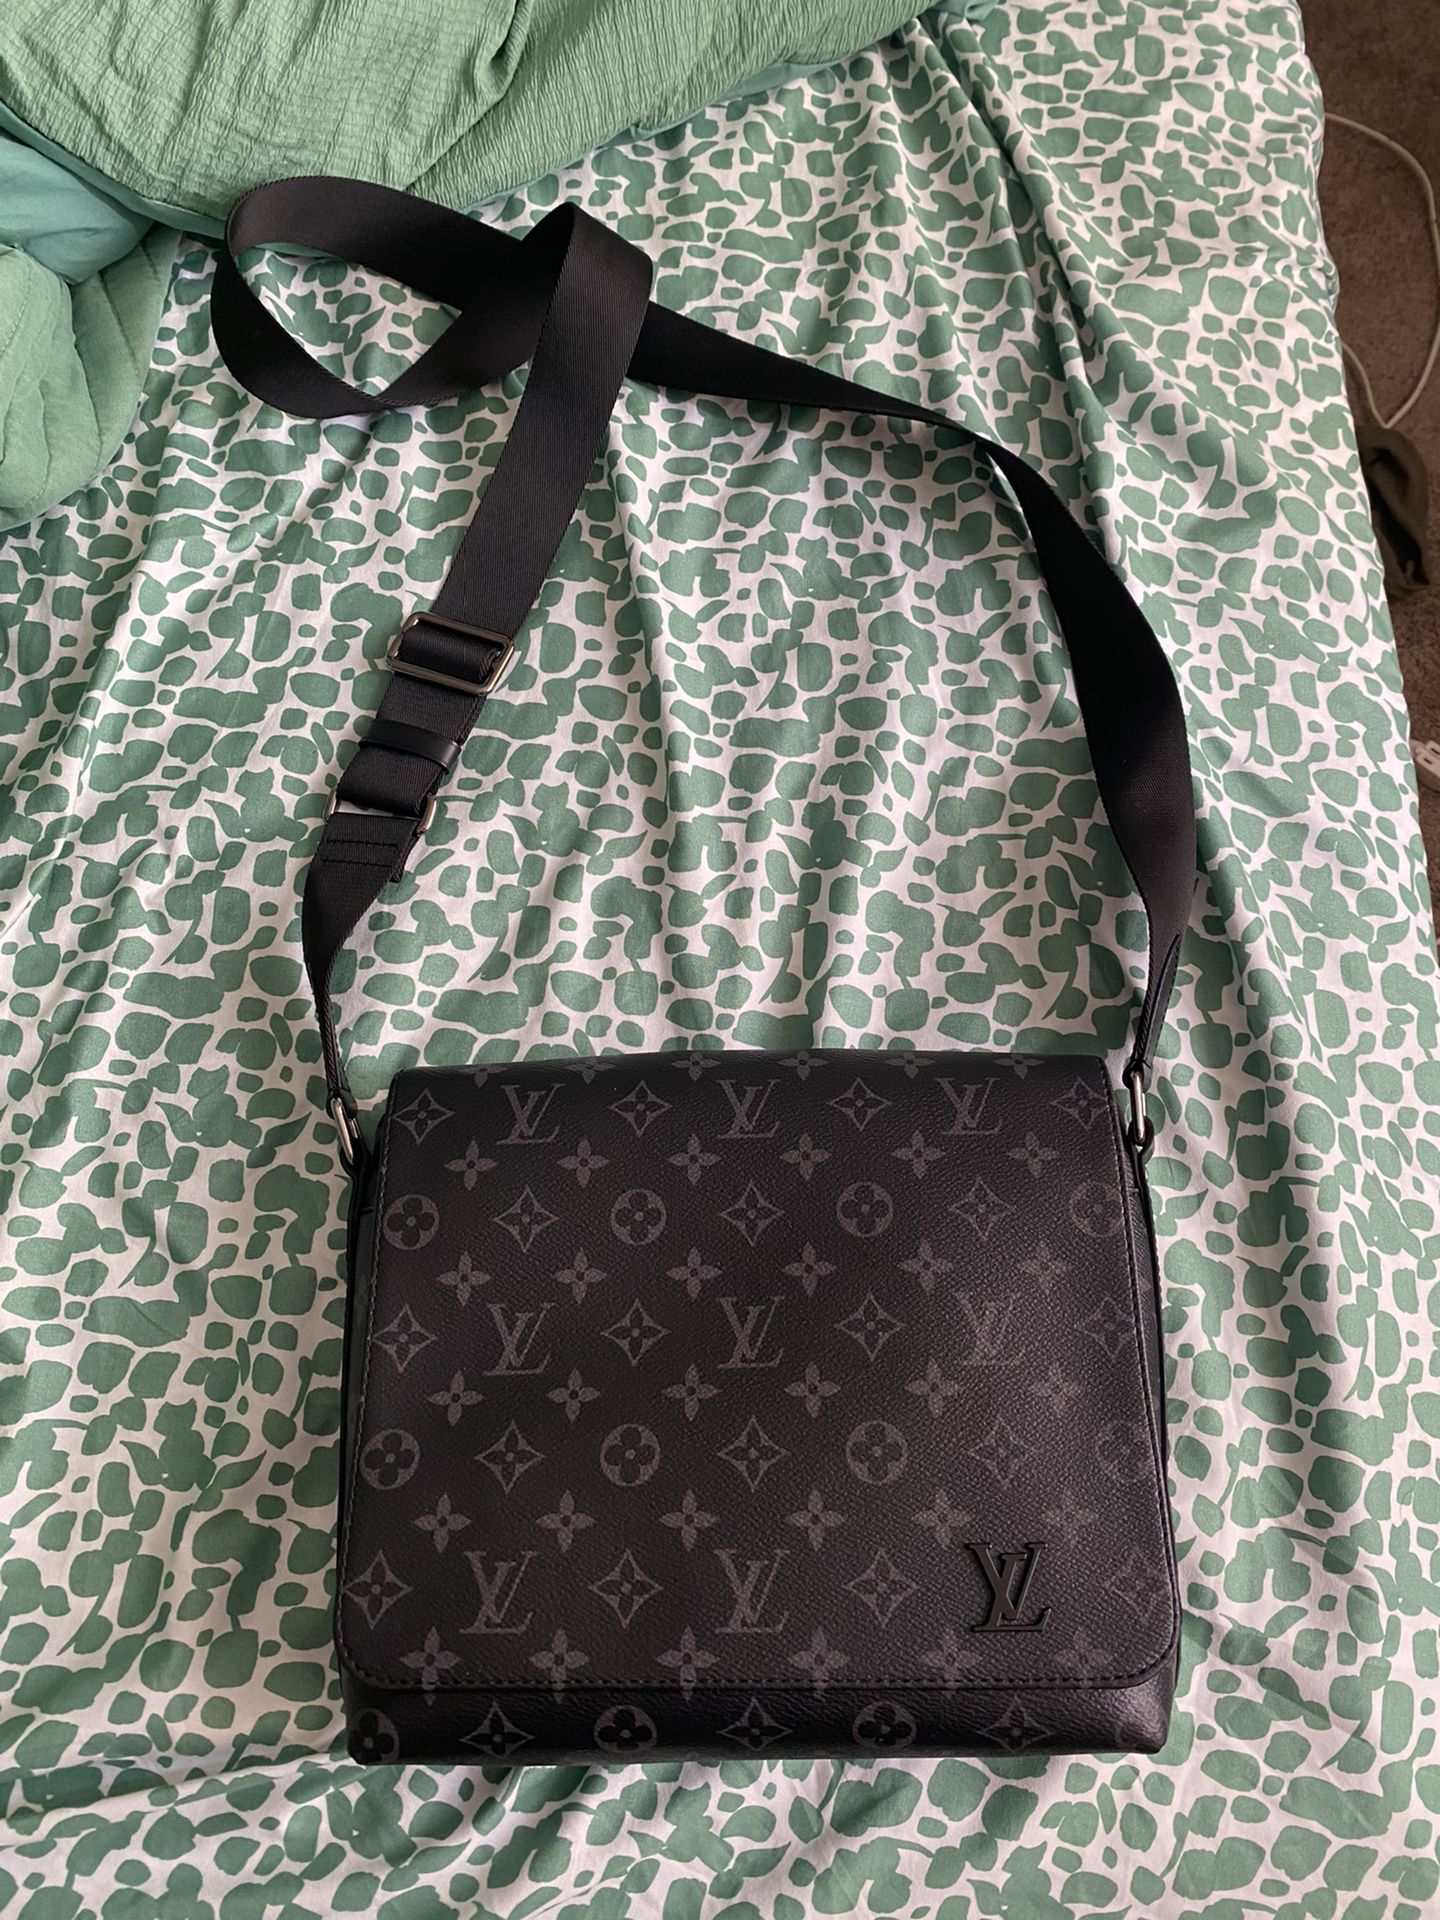 Louis Vuitton Hudson Gm Bag for Sale in No Huntingdon, PA - OfferUp